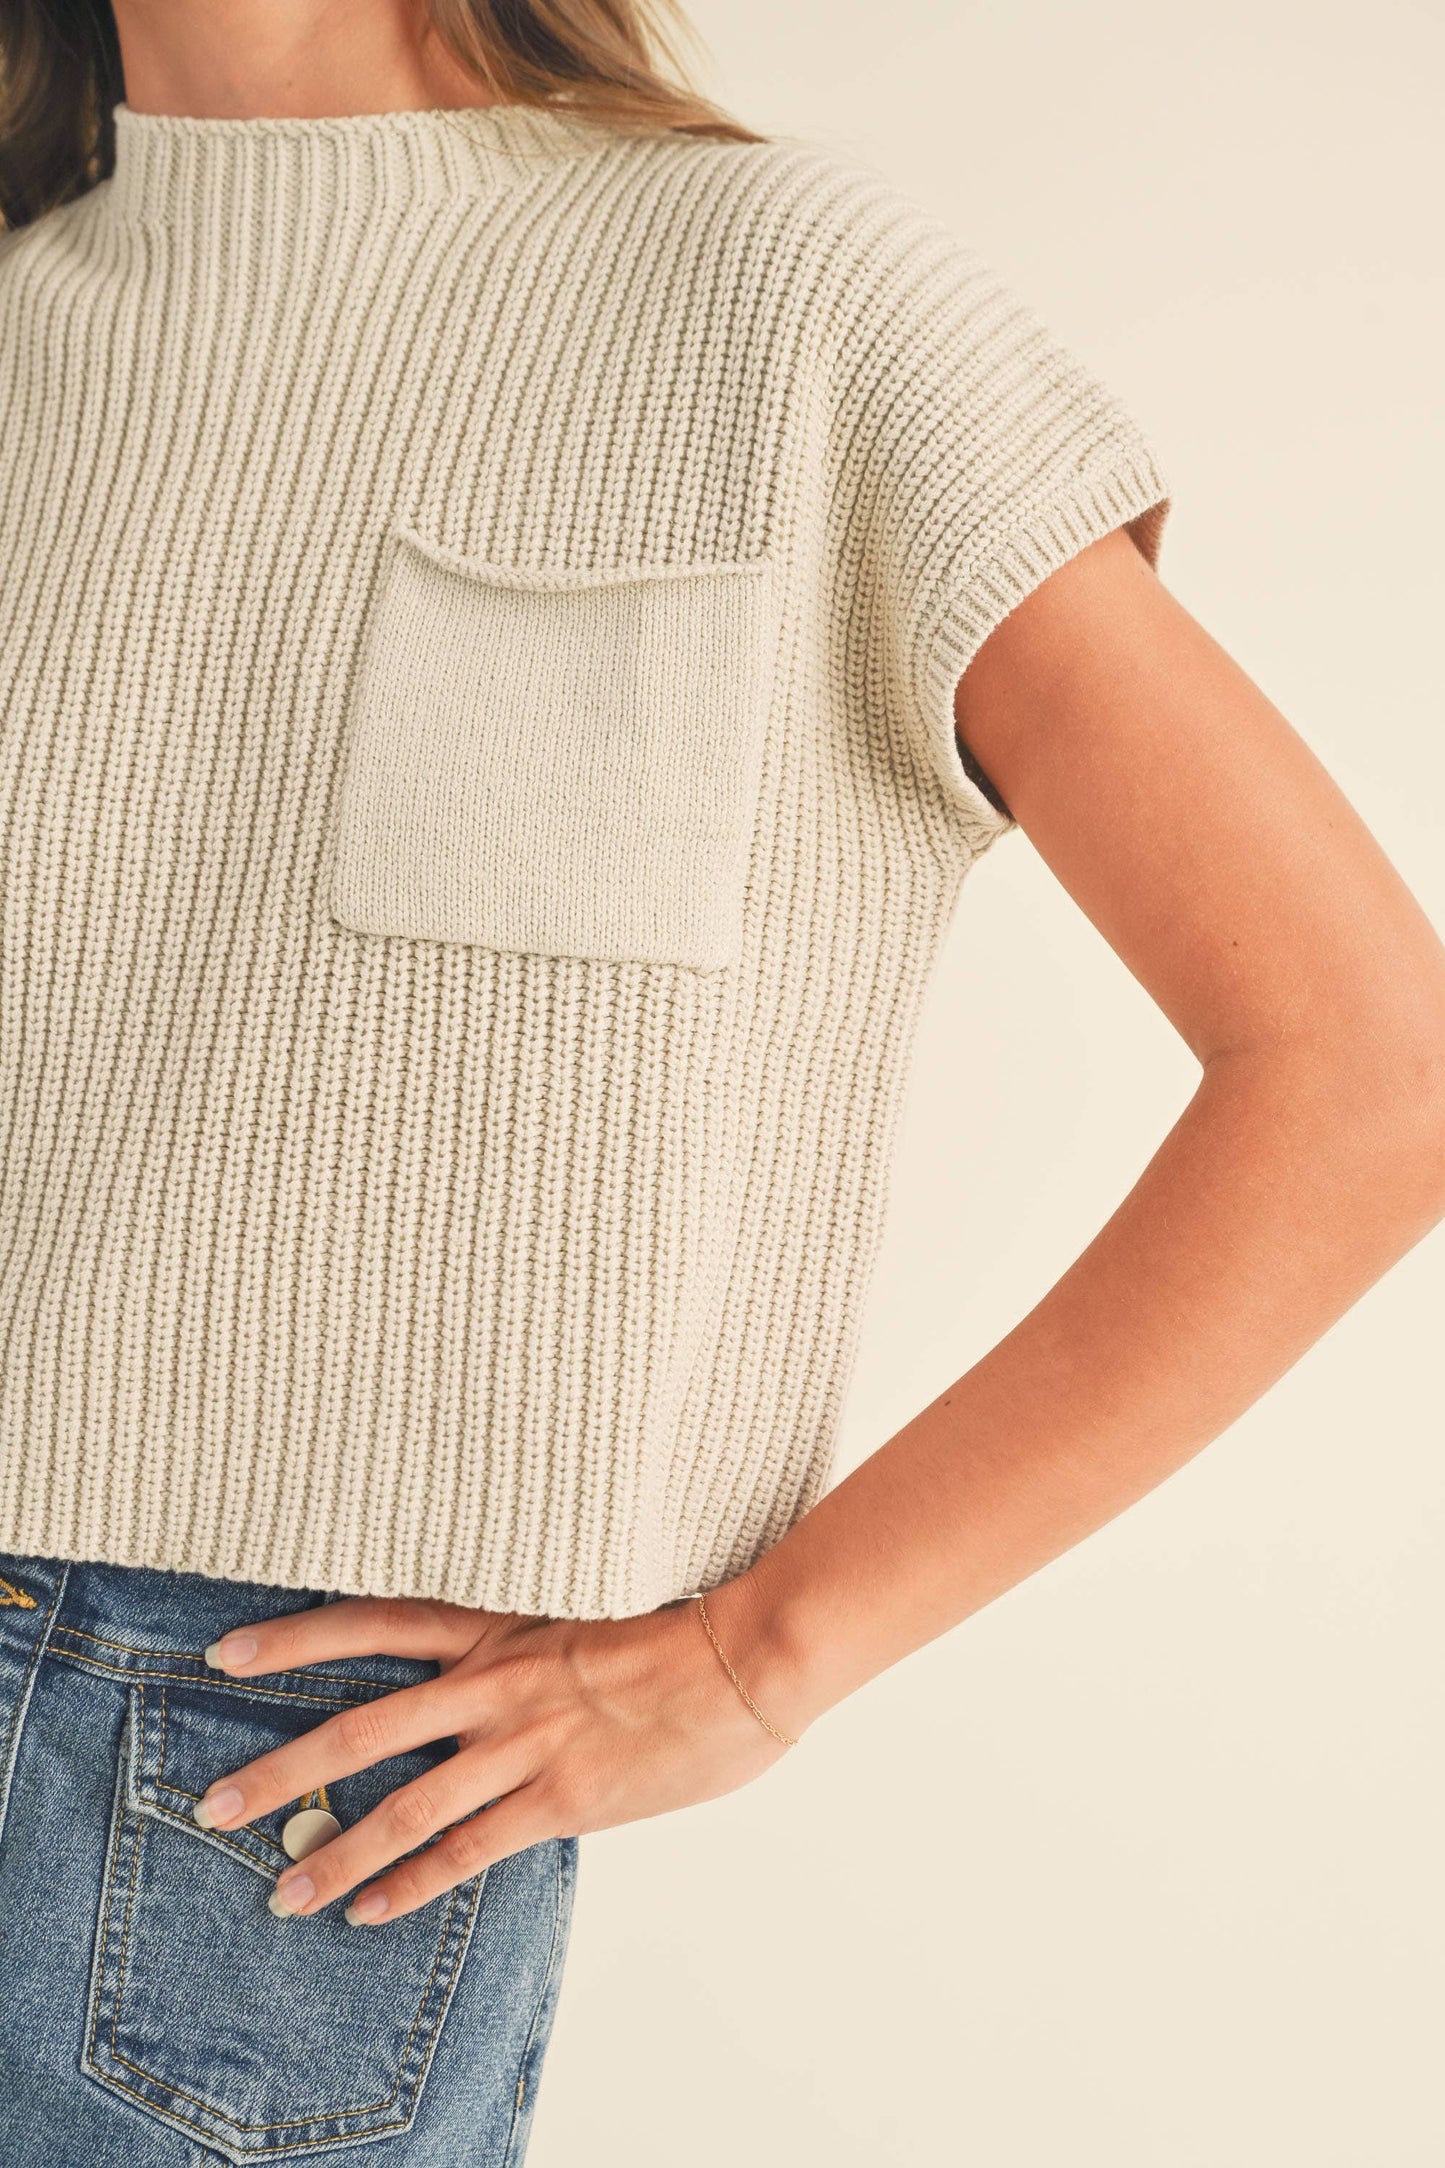 Half High Neck Sweater Knit Top - Stone